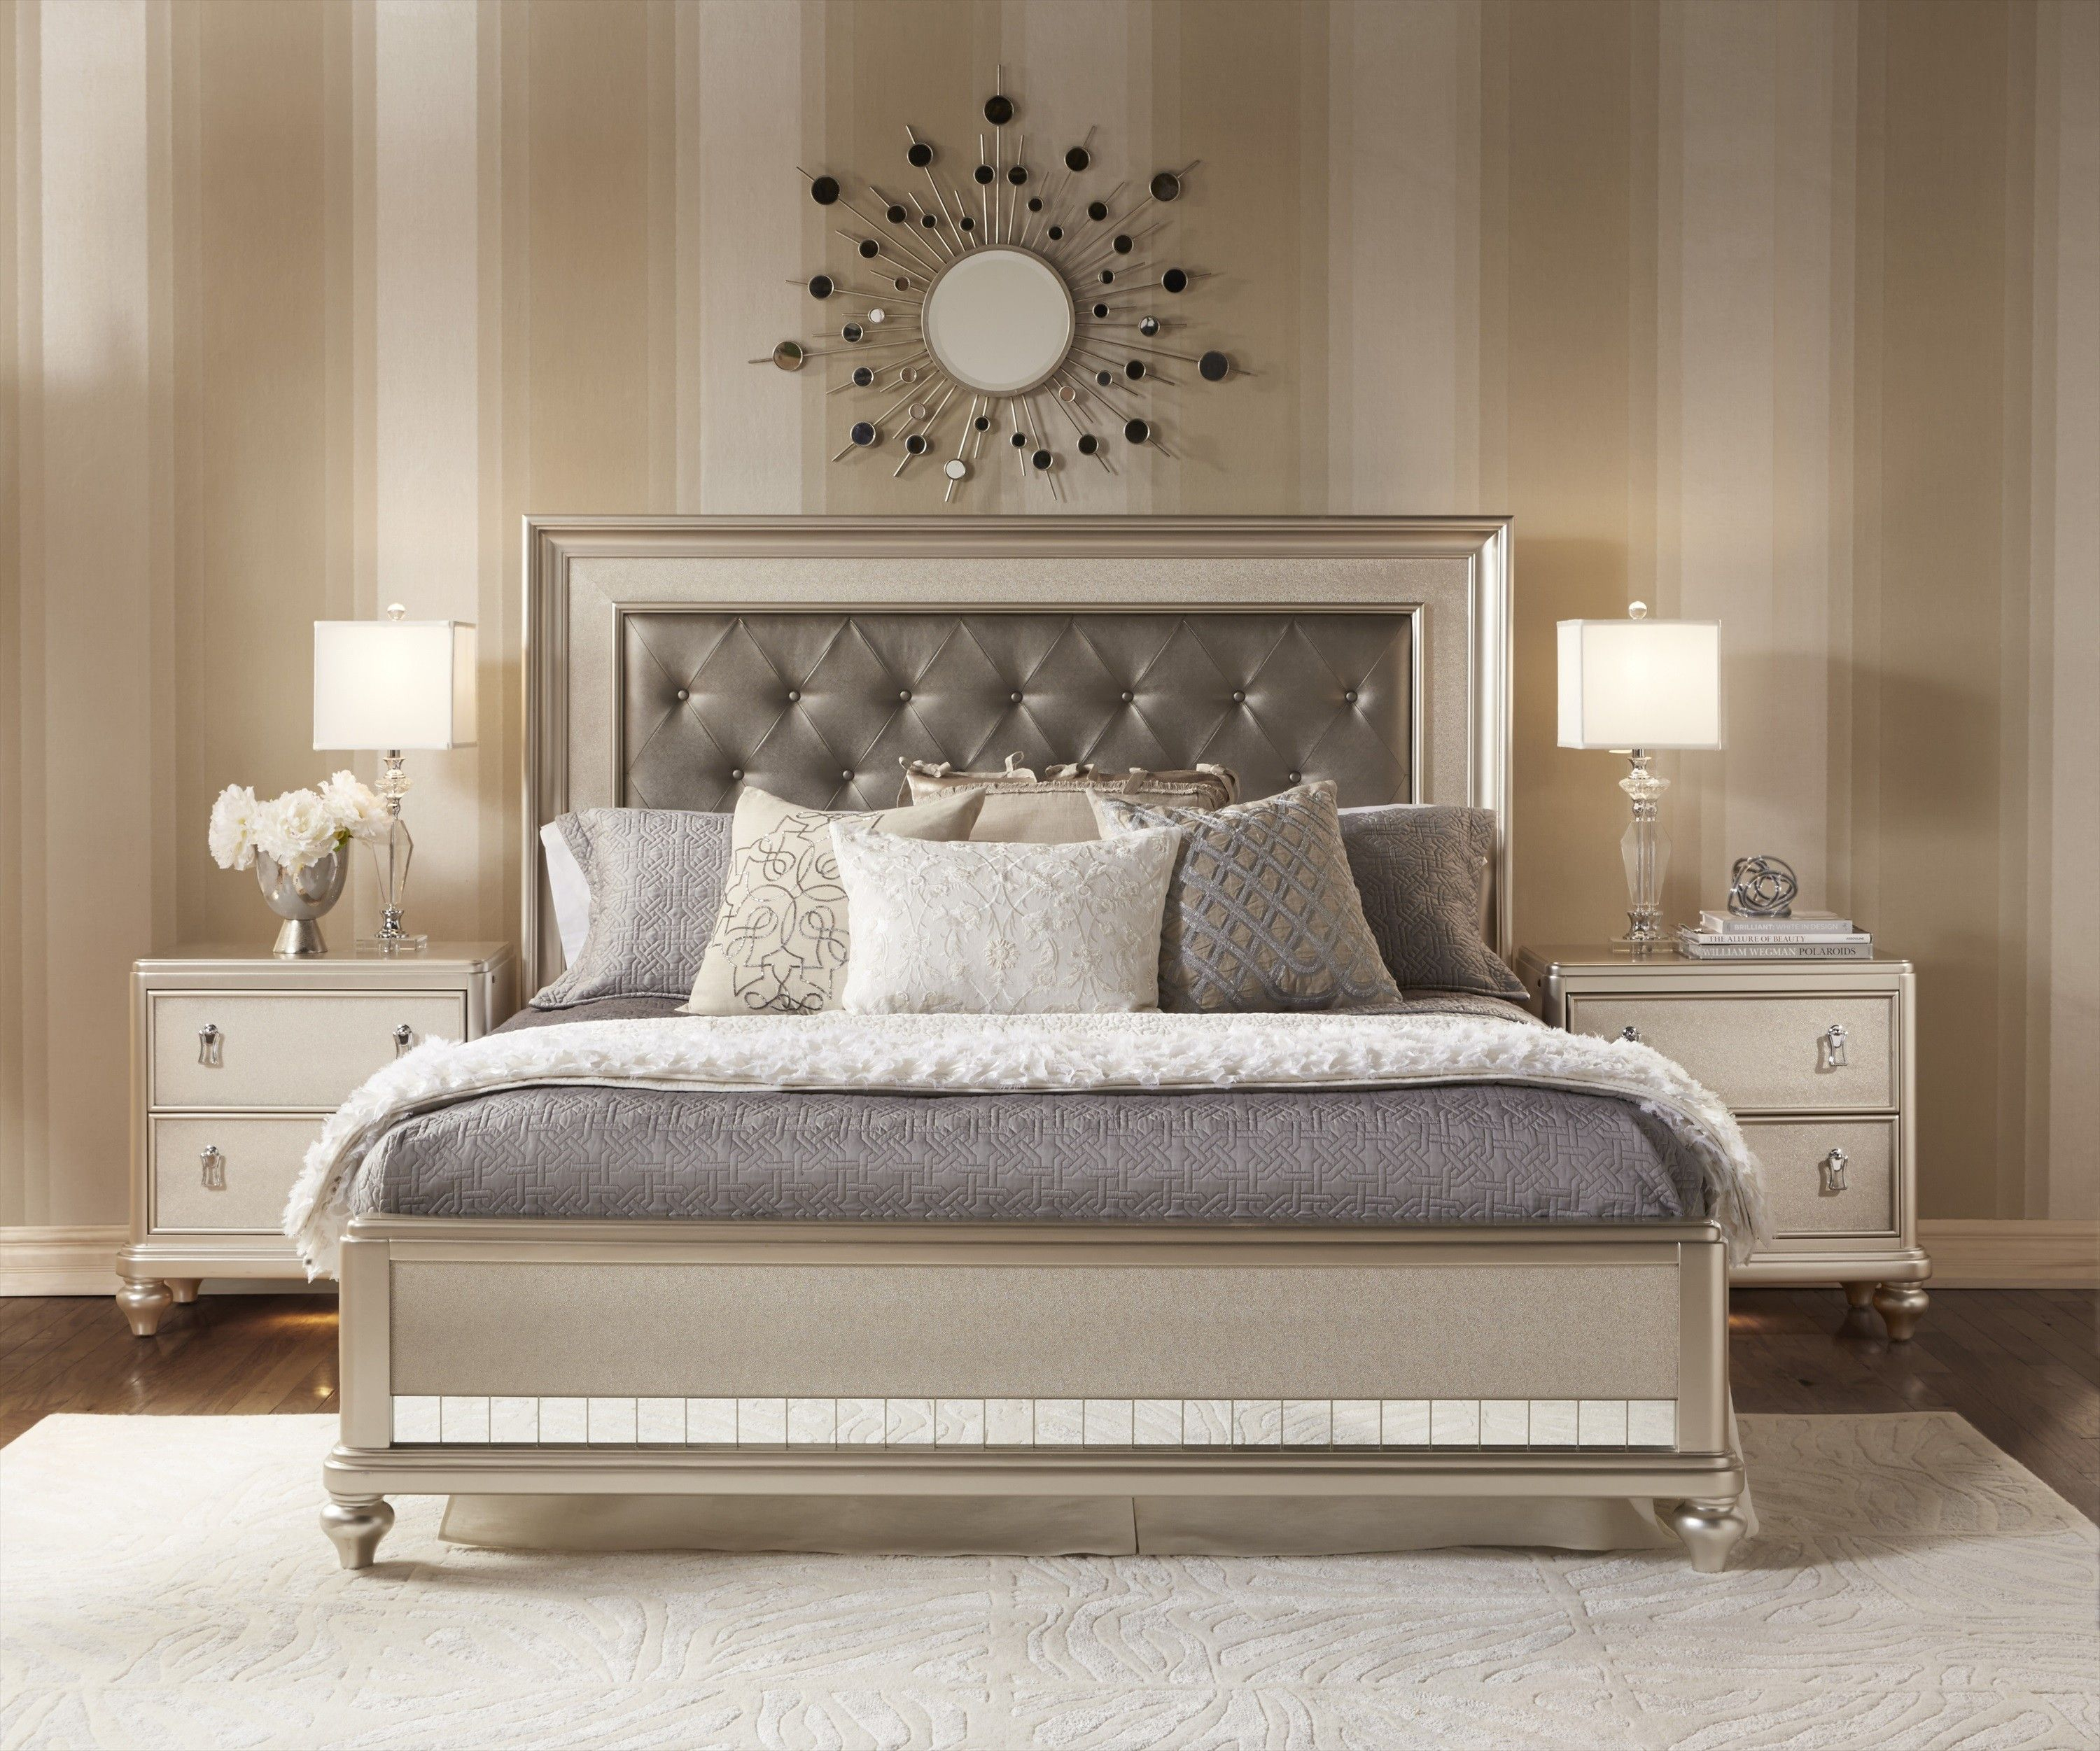 Champagne Bedroom Traditional Champagne Finish Bedroom Master within size 3000 X 2502